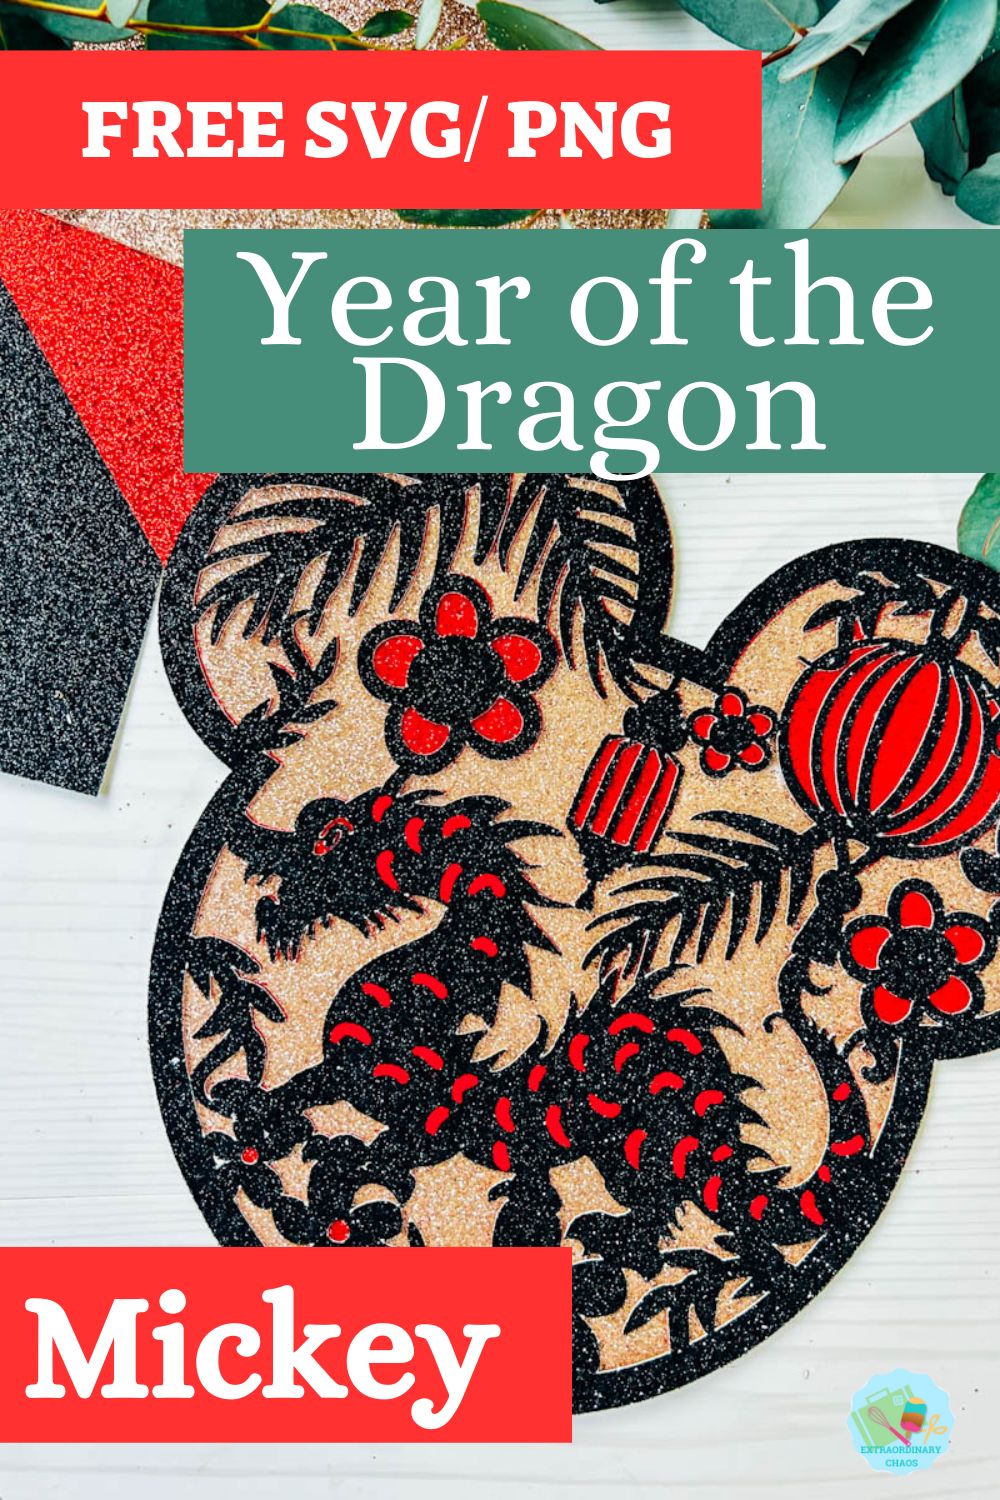 Free layered SVG PNG Chinese New Year, Year of the Dragon Mickey for Cricut and Silhouette